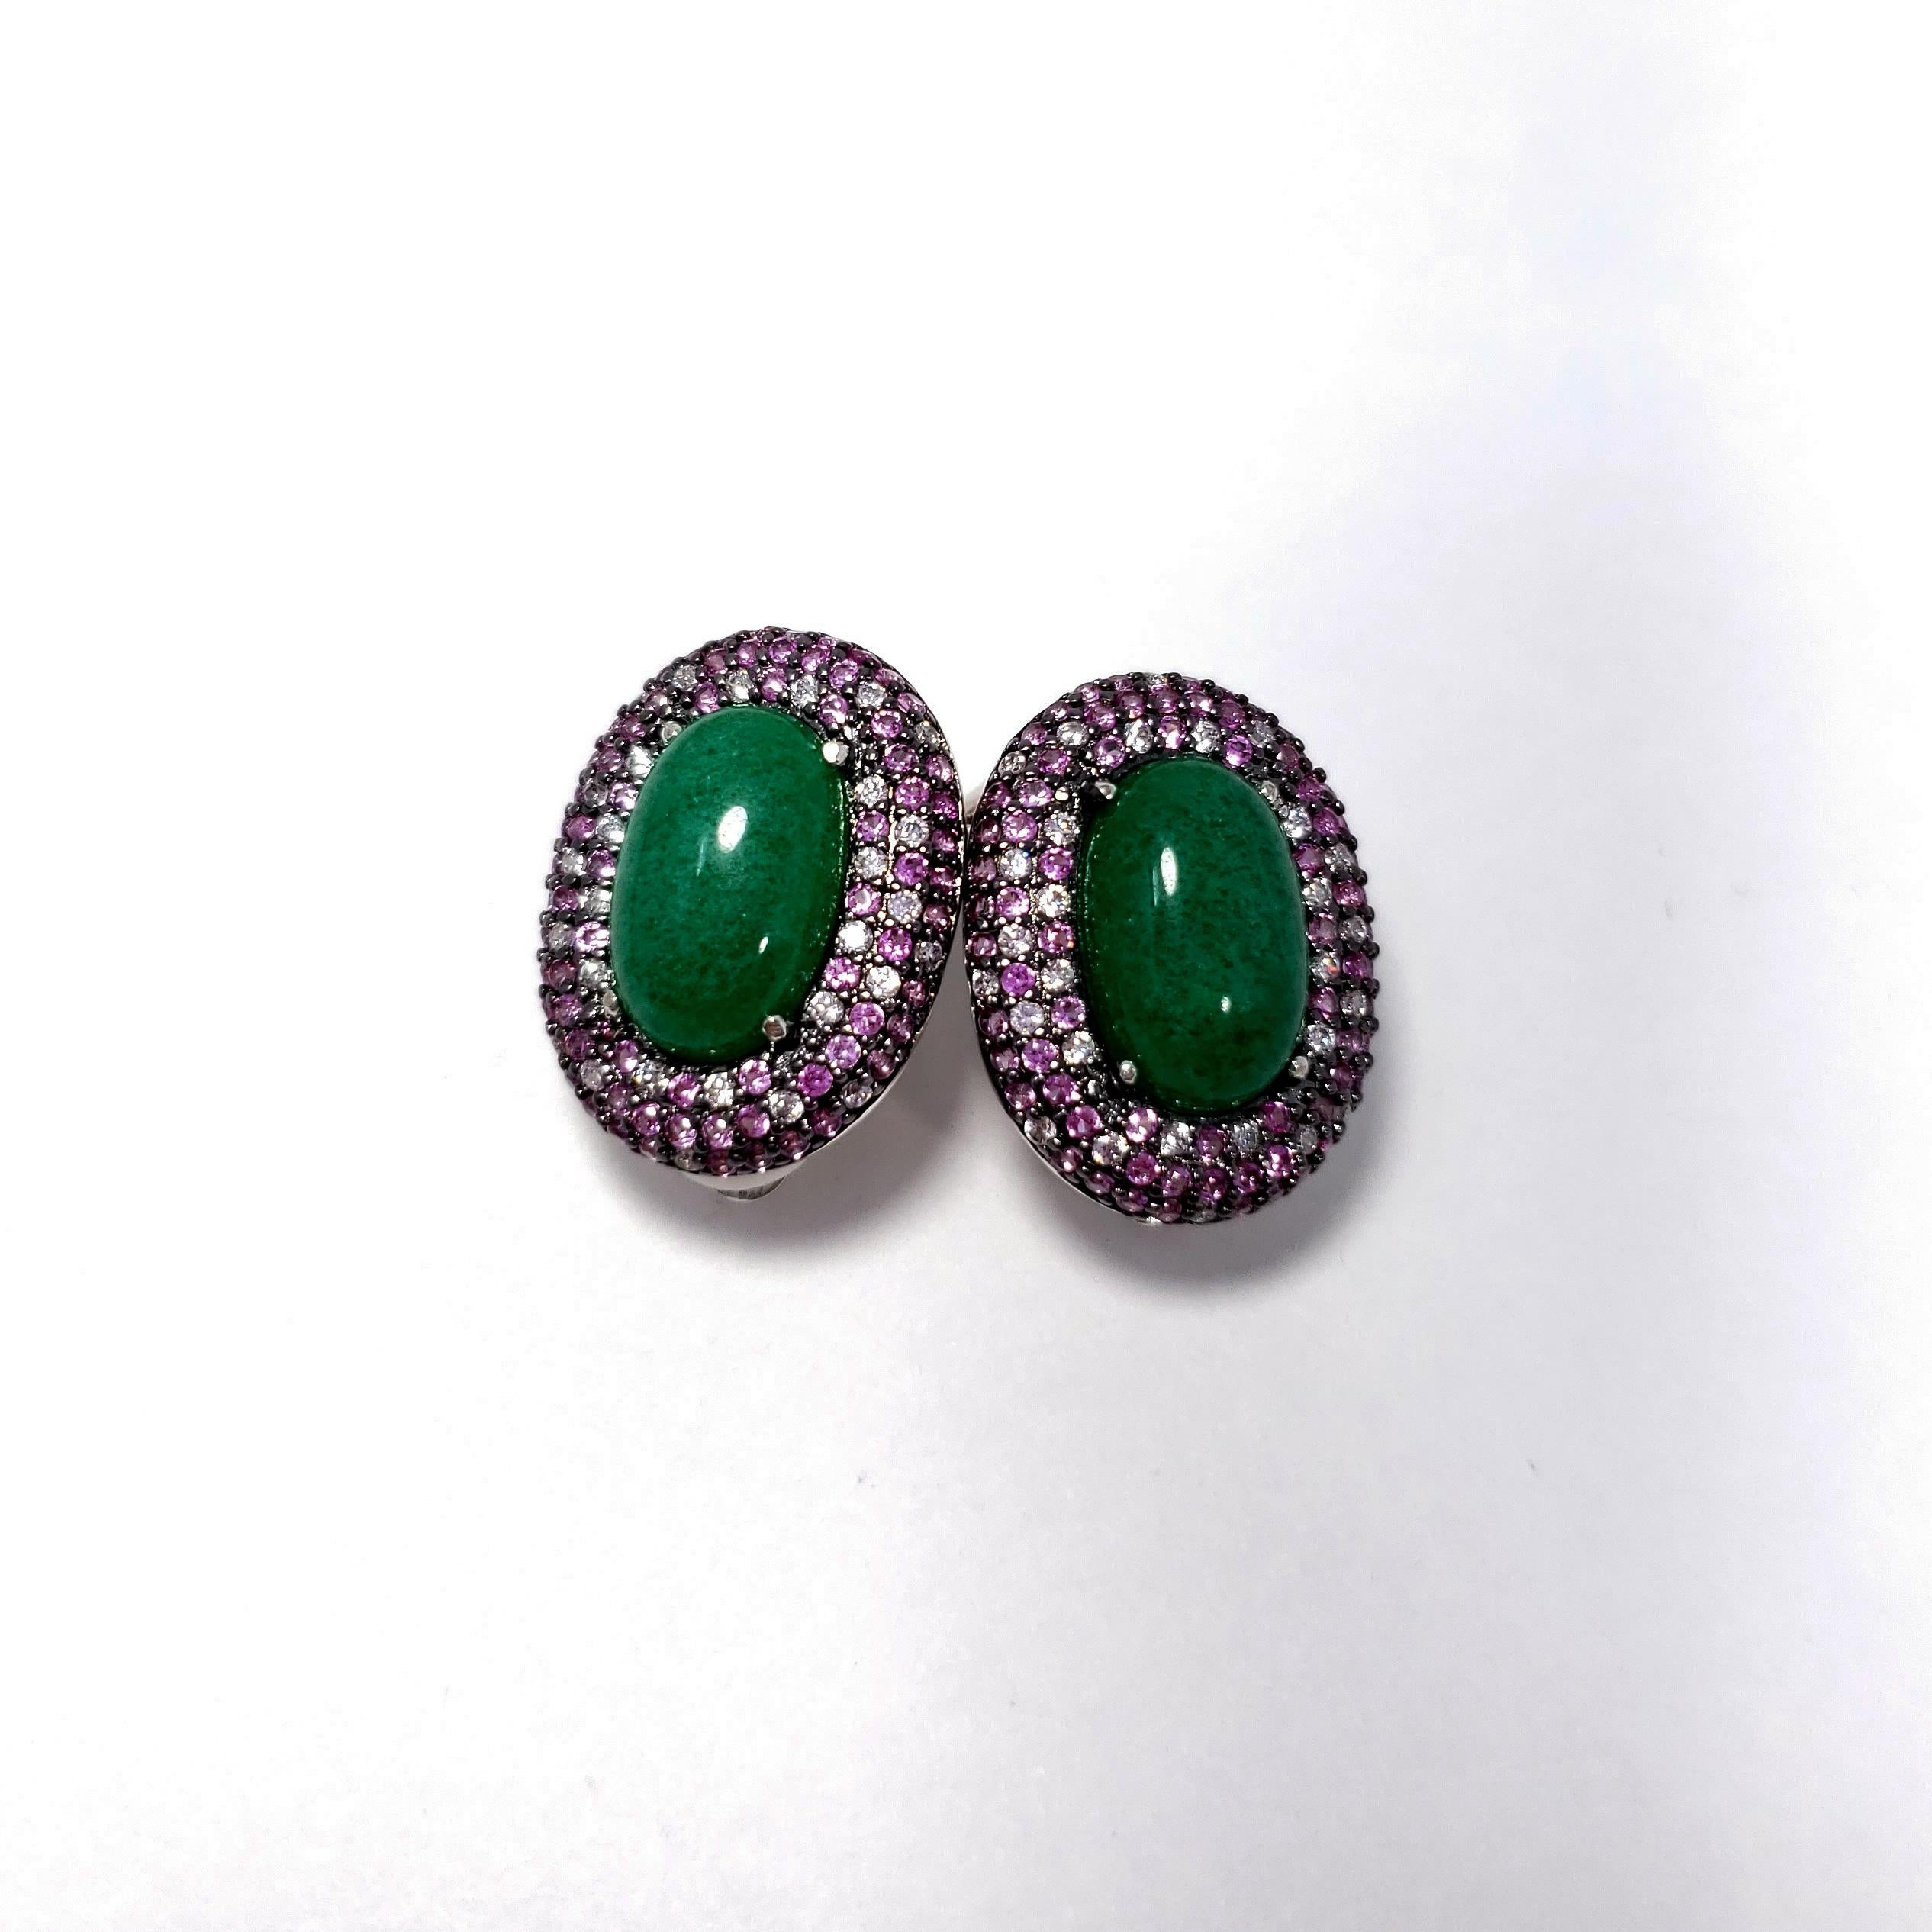 Kenneth Jay Lane CZ KJL Green Cabochon and Rose Cubic Zirconia Clip on Earrings 1